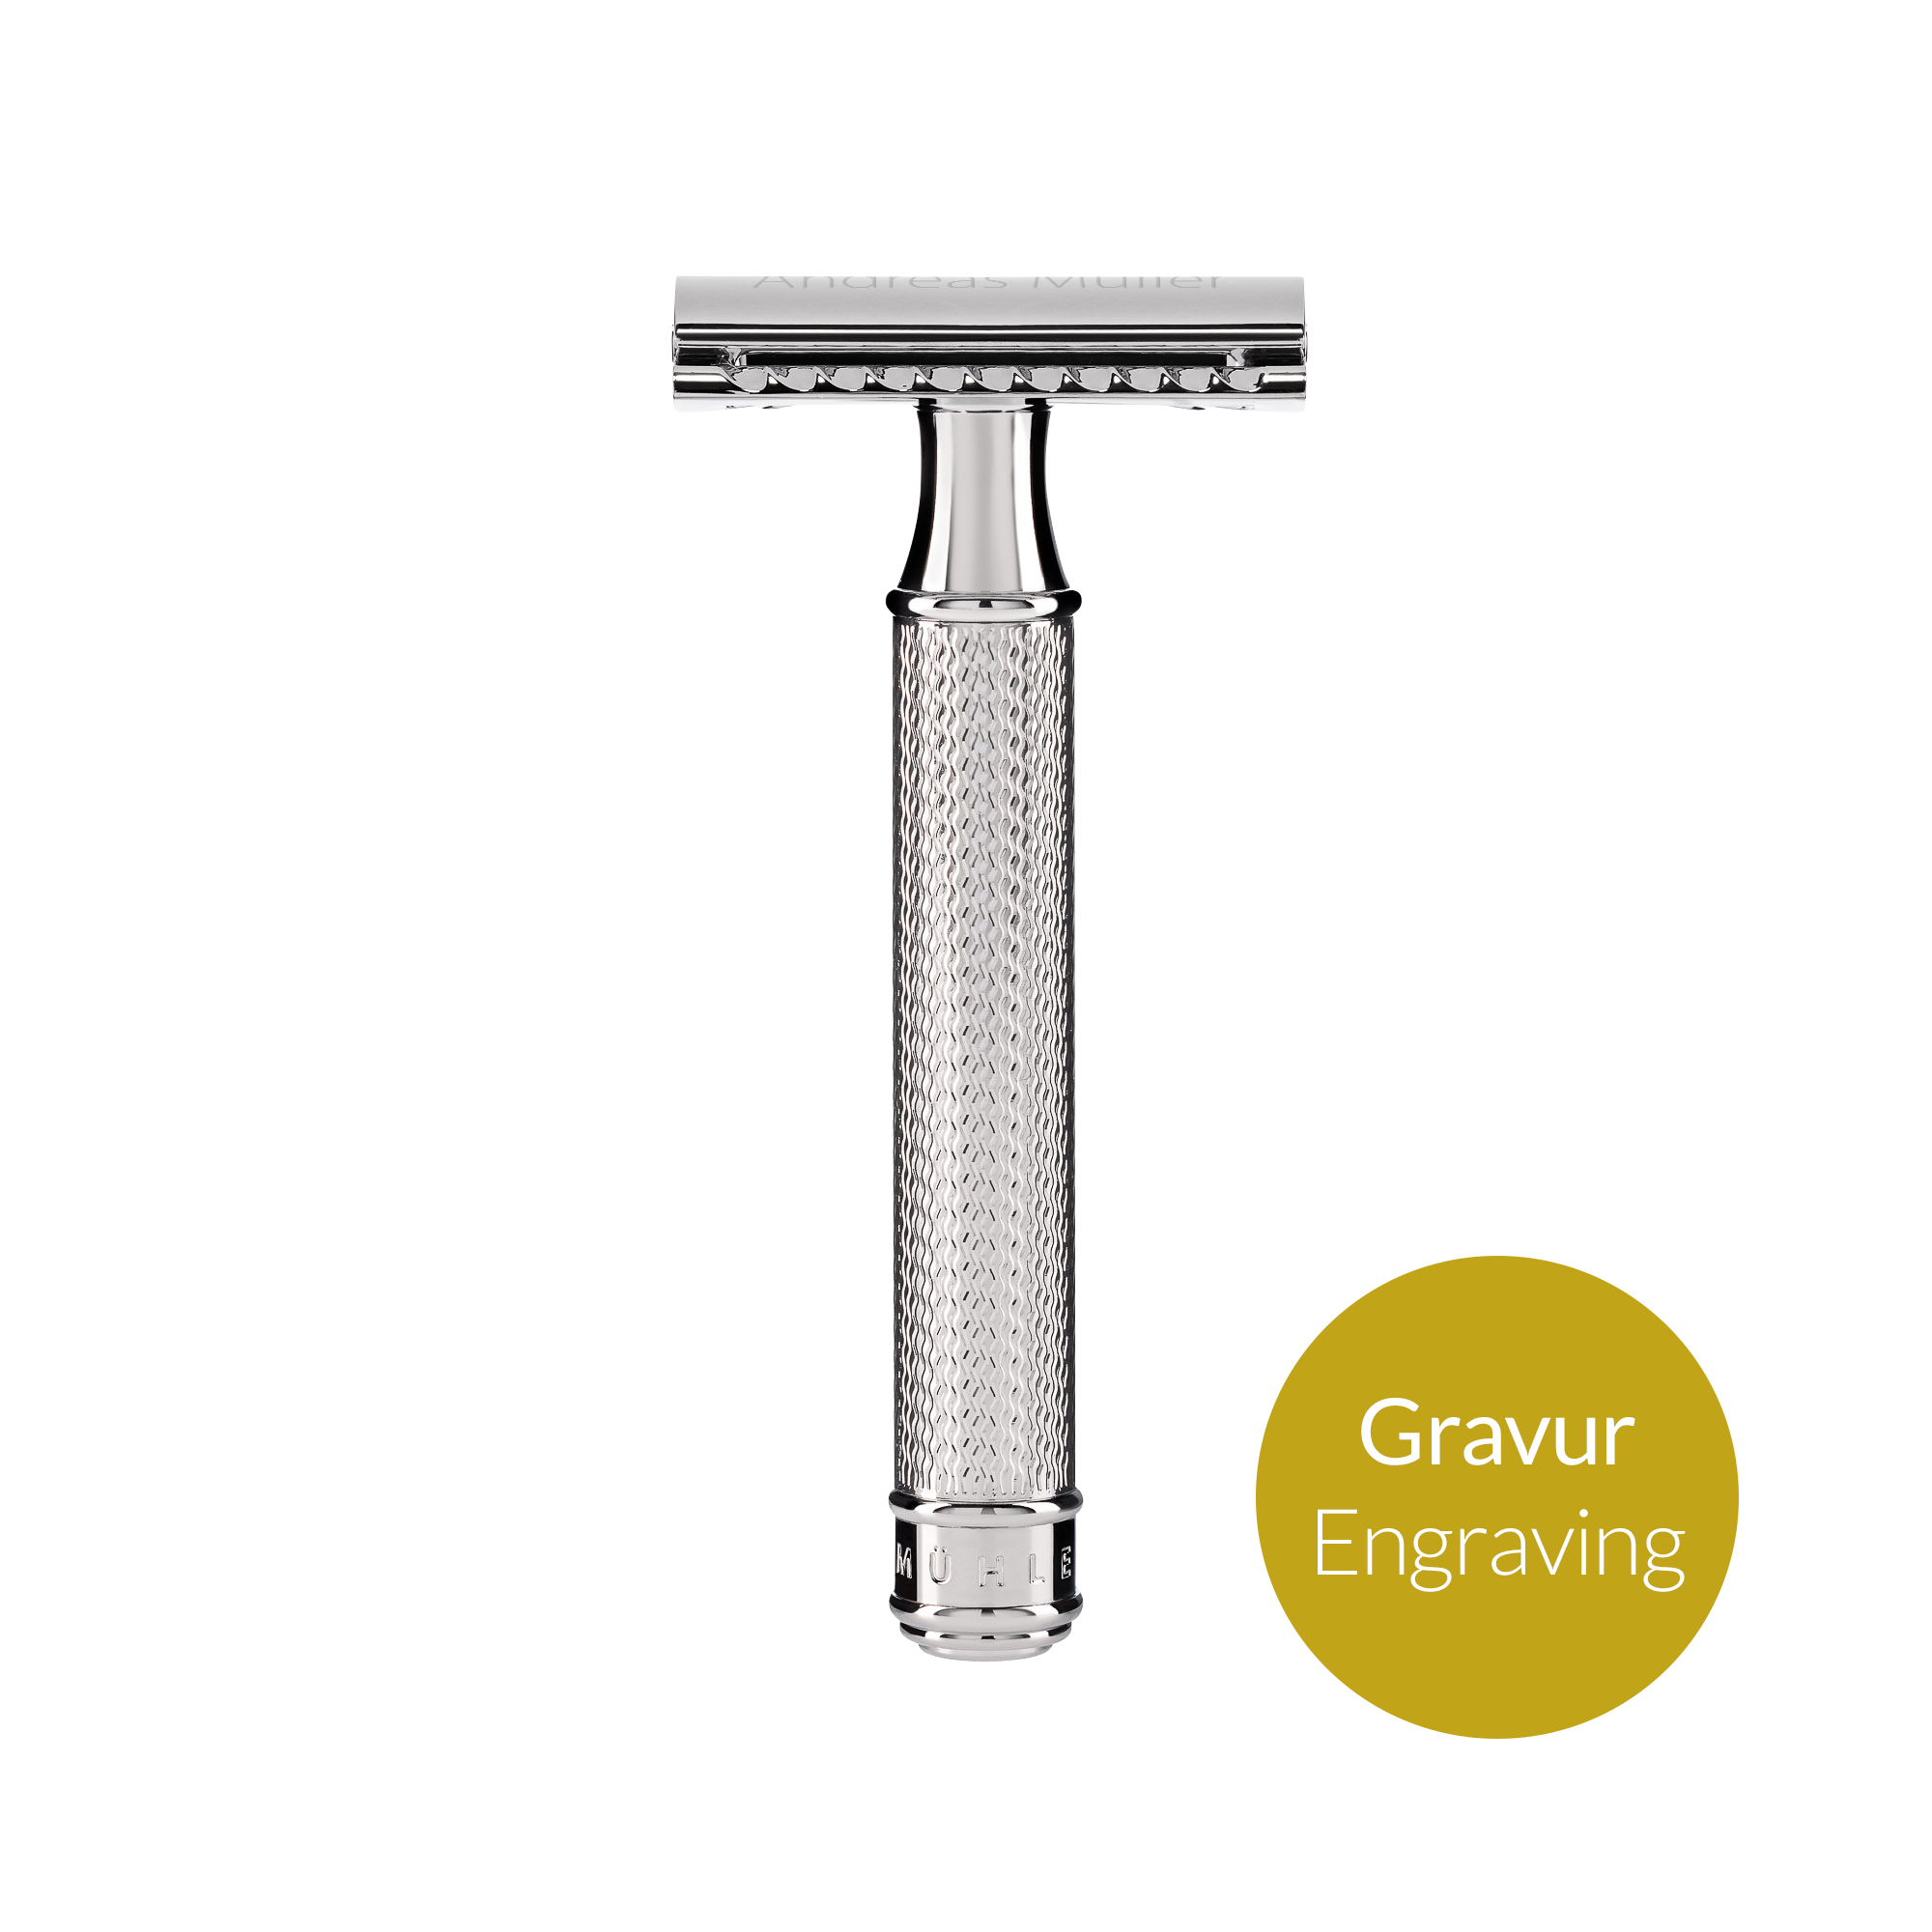 TRADITIONAL Razor, with engraving